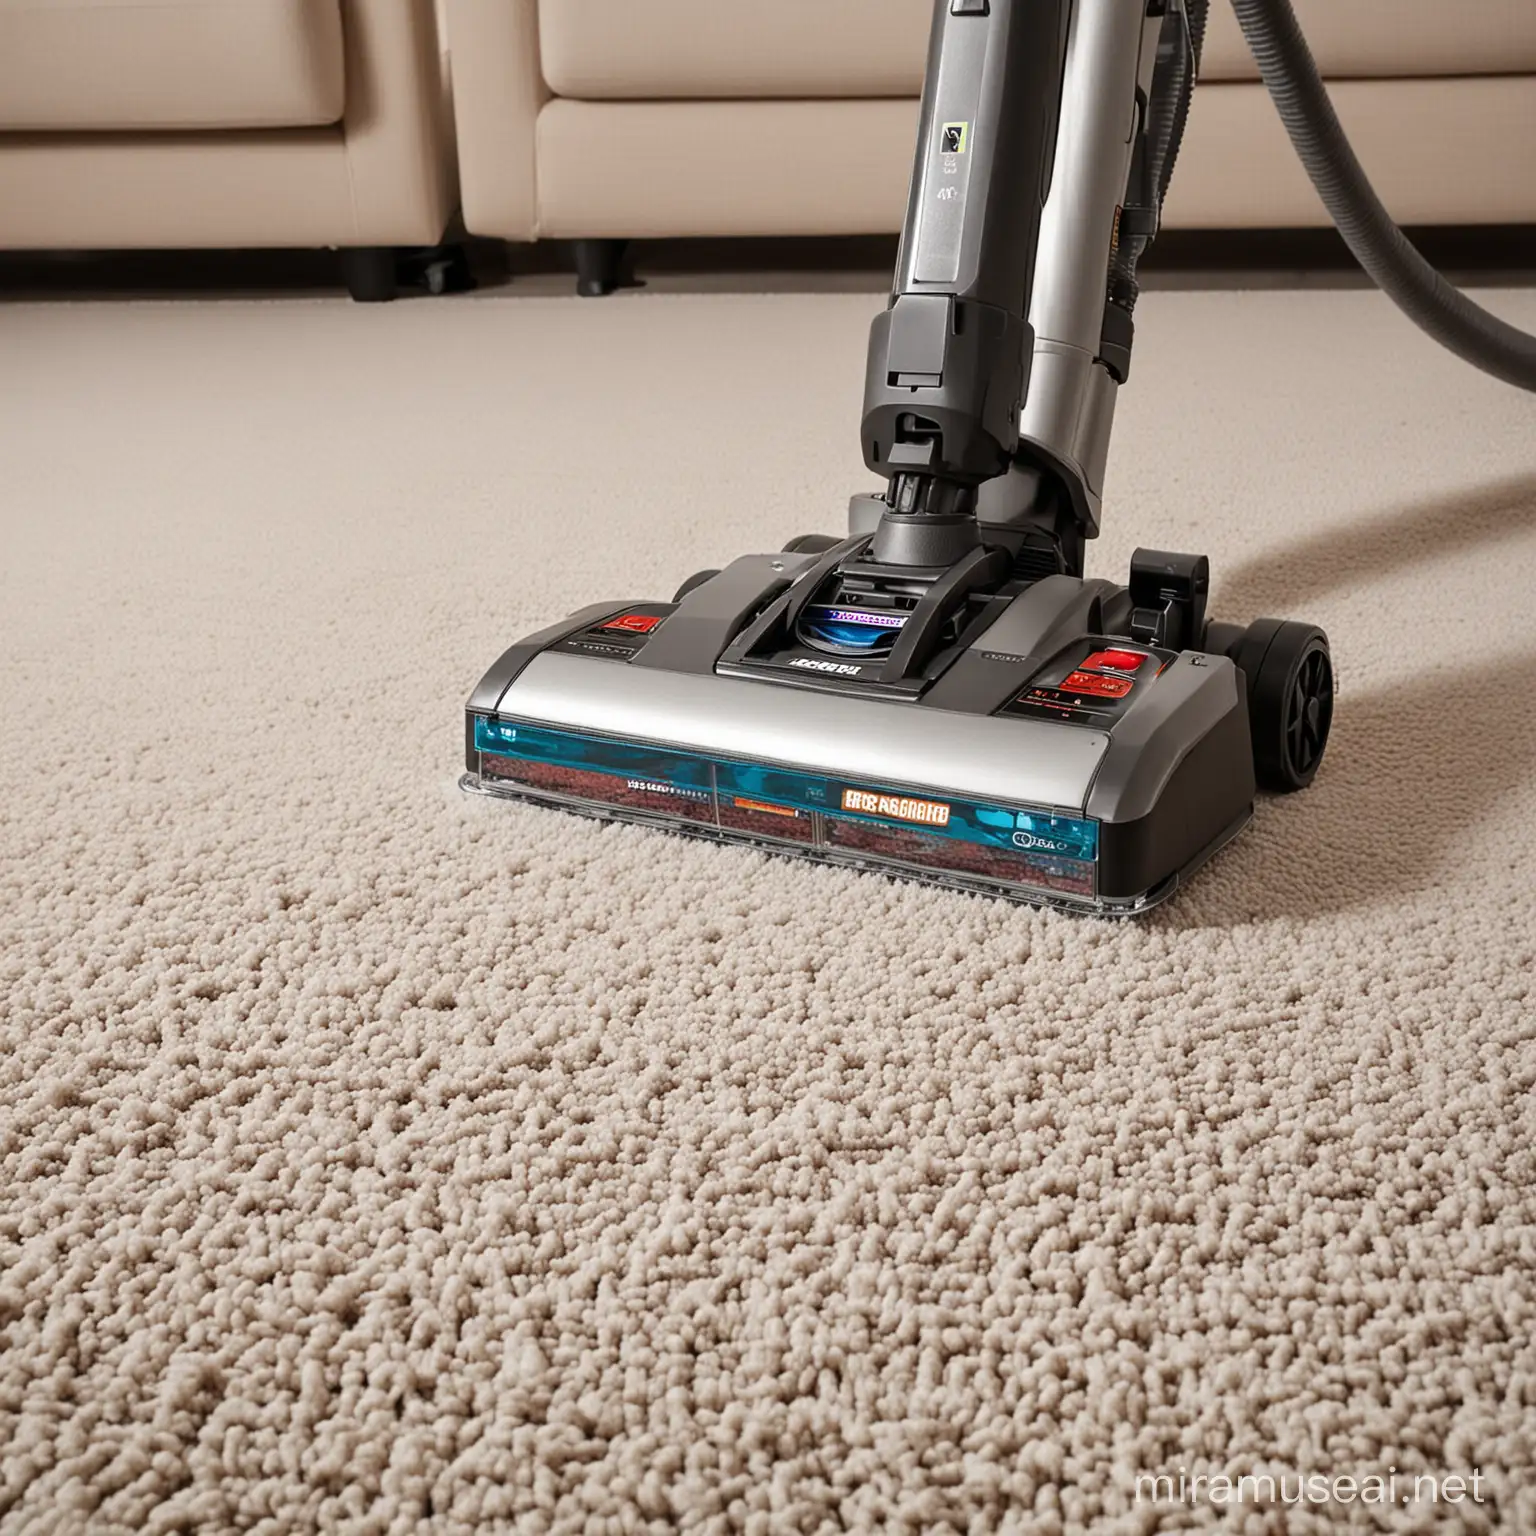 Modern Premium Carpet Cleaning Machine with Innovative Technology